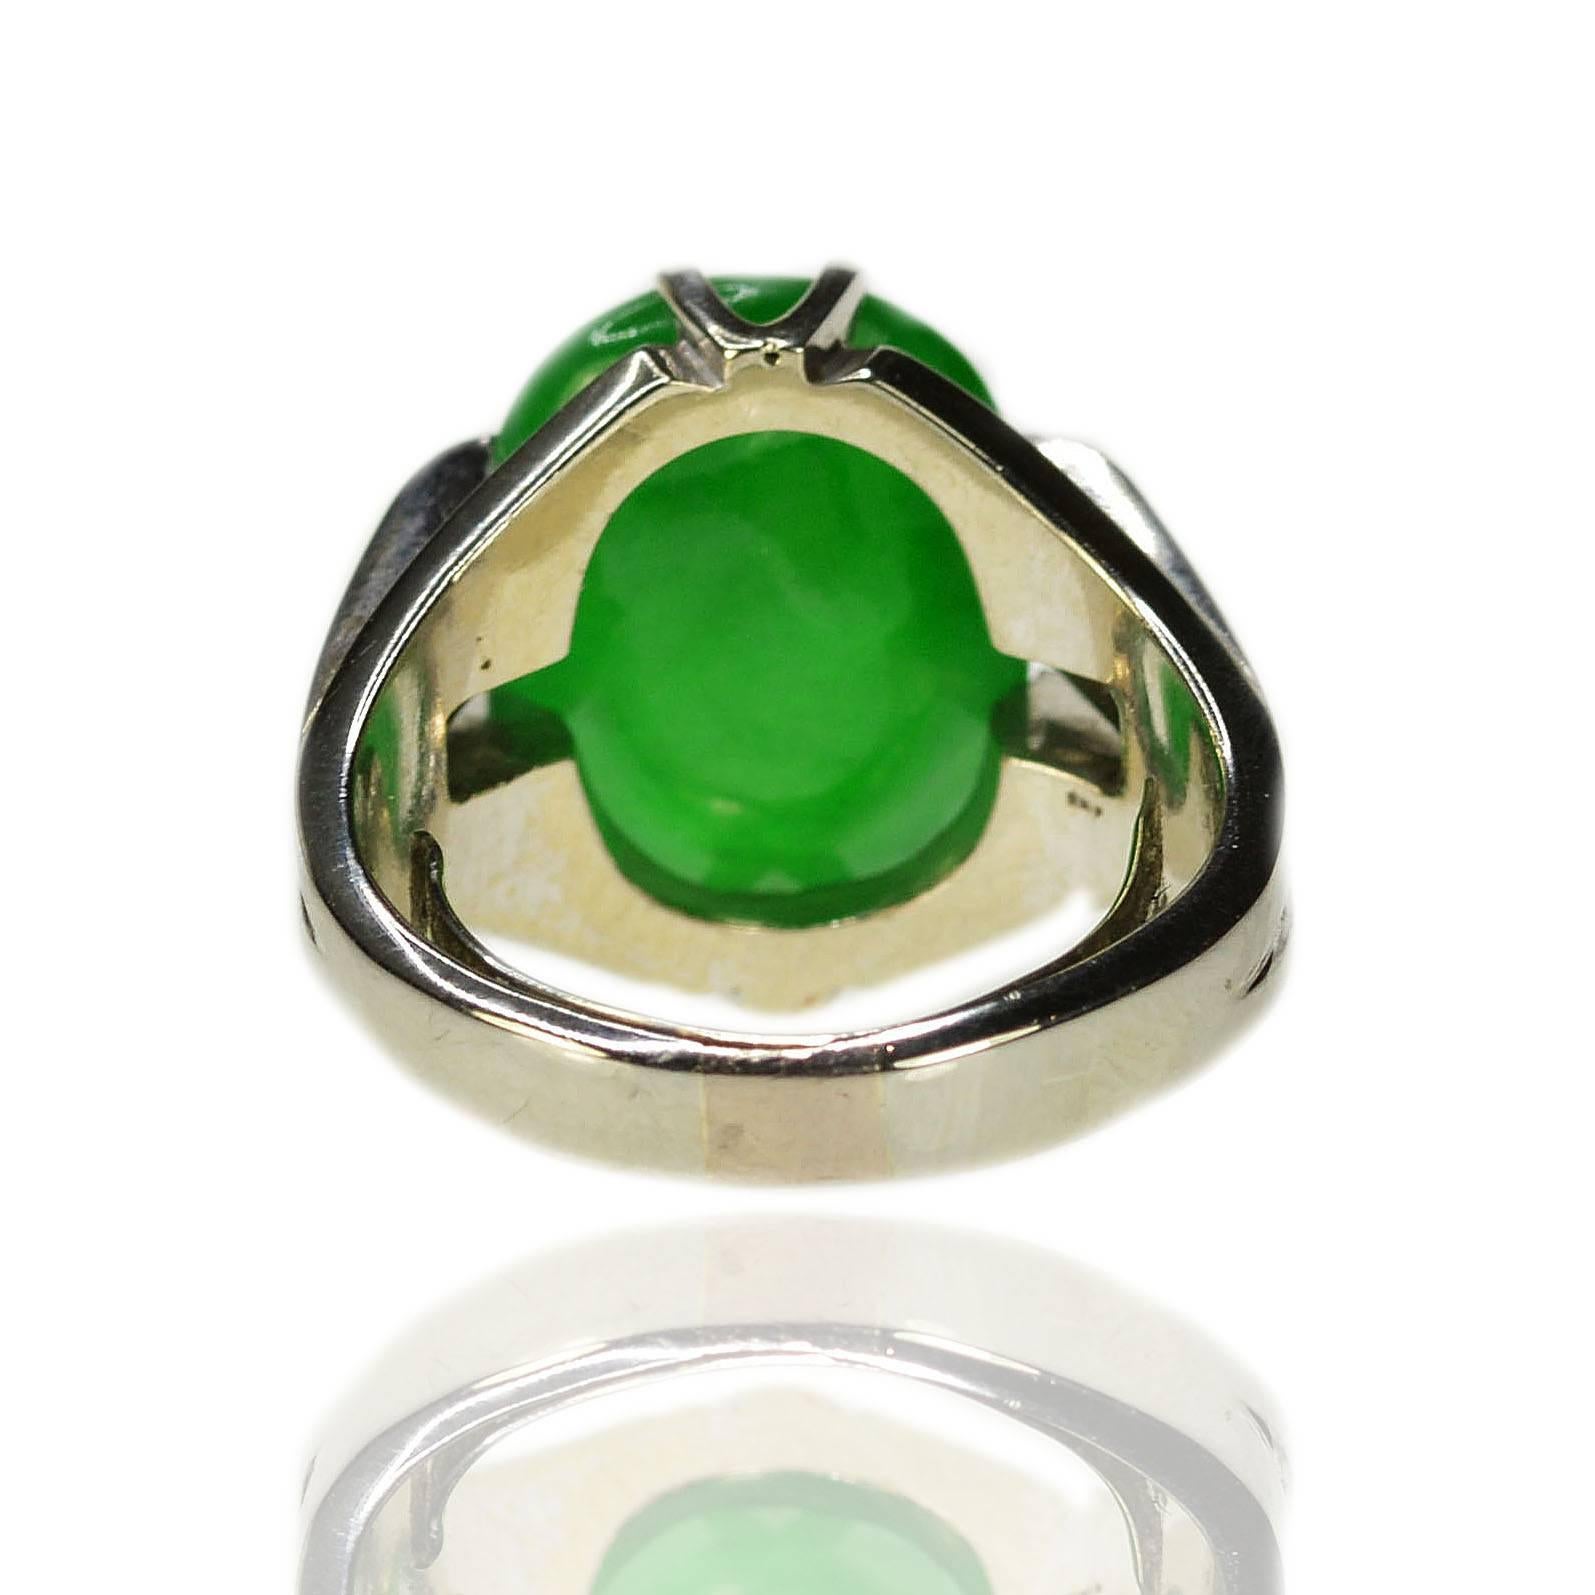 Platinum Ring  with one GIA certified no treatment Jadeite Jade weighing approximately 10.30 carats and approximately 0.20 carats of fine diamonds, 10.56g